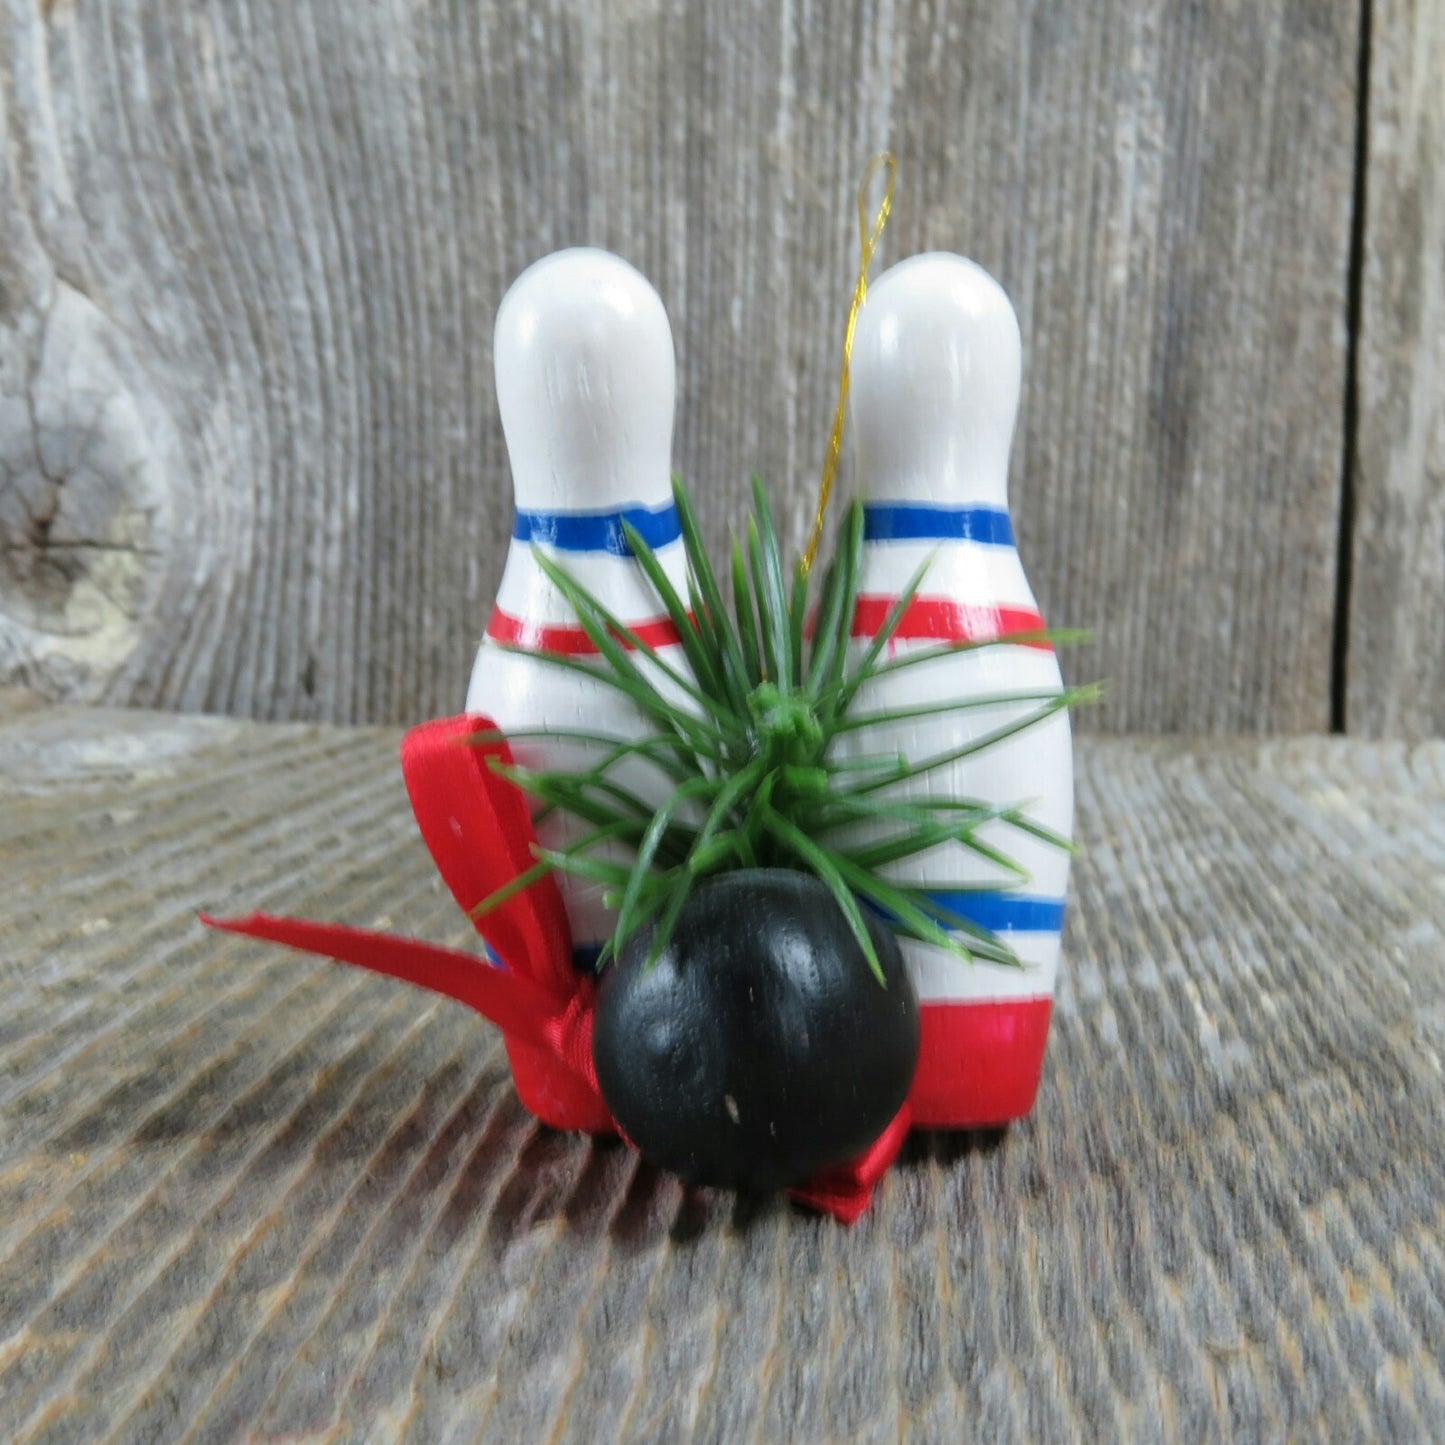 Vintage Bowling Ball and Pins Wood Christmas Ornament with Red Bow Holiday Decor - At Grandma's Table